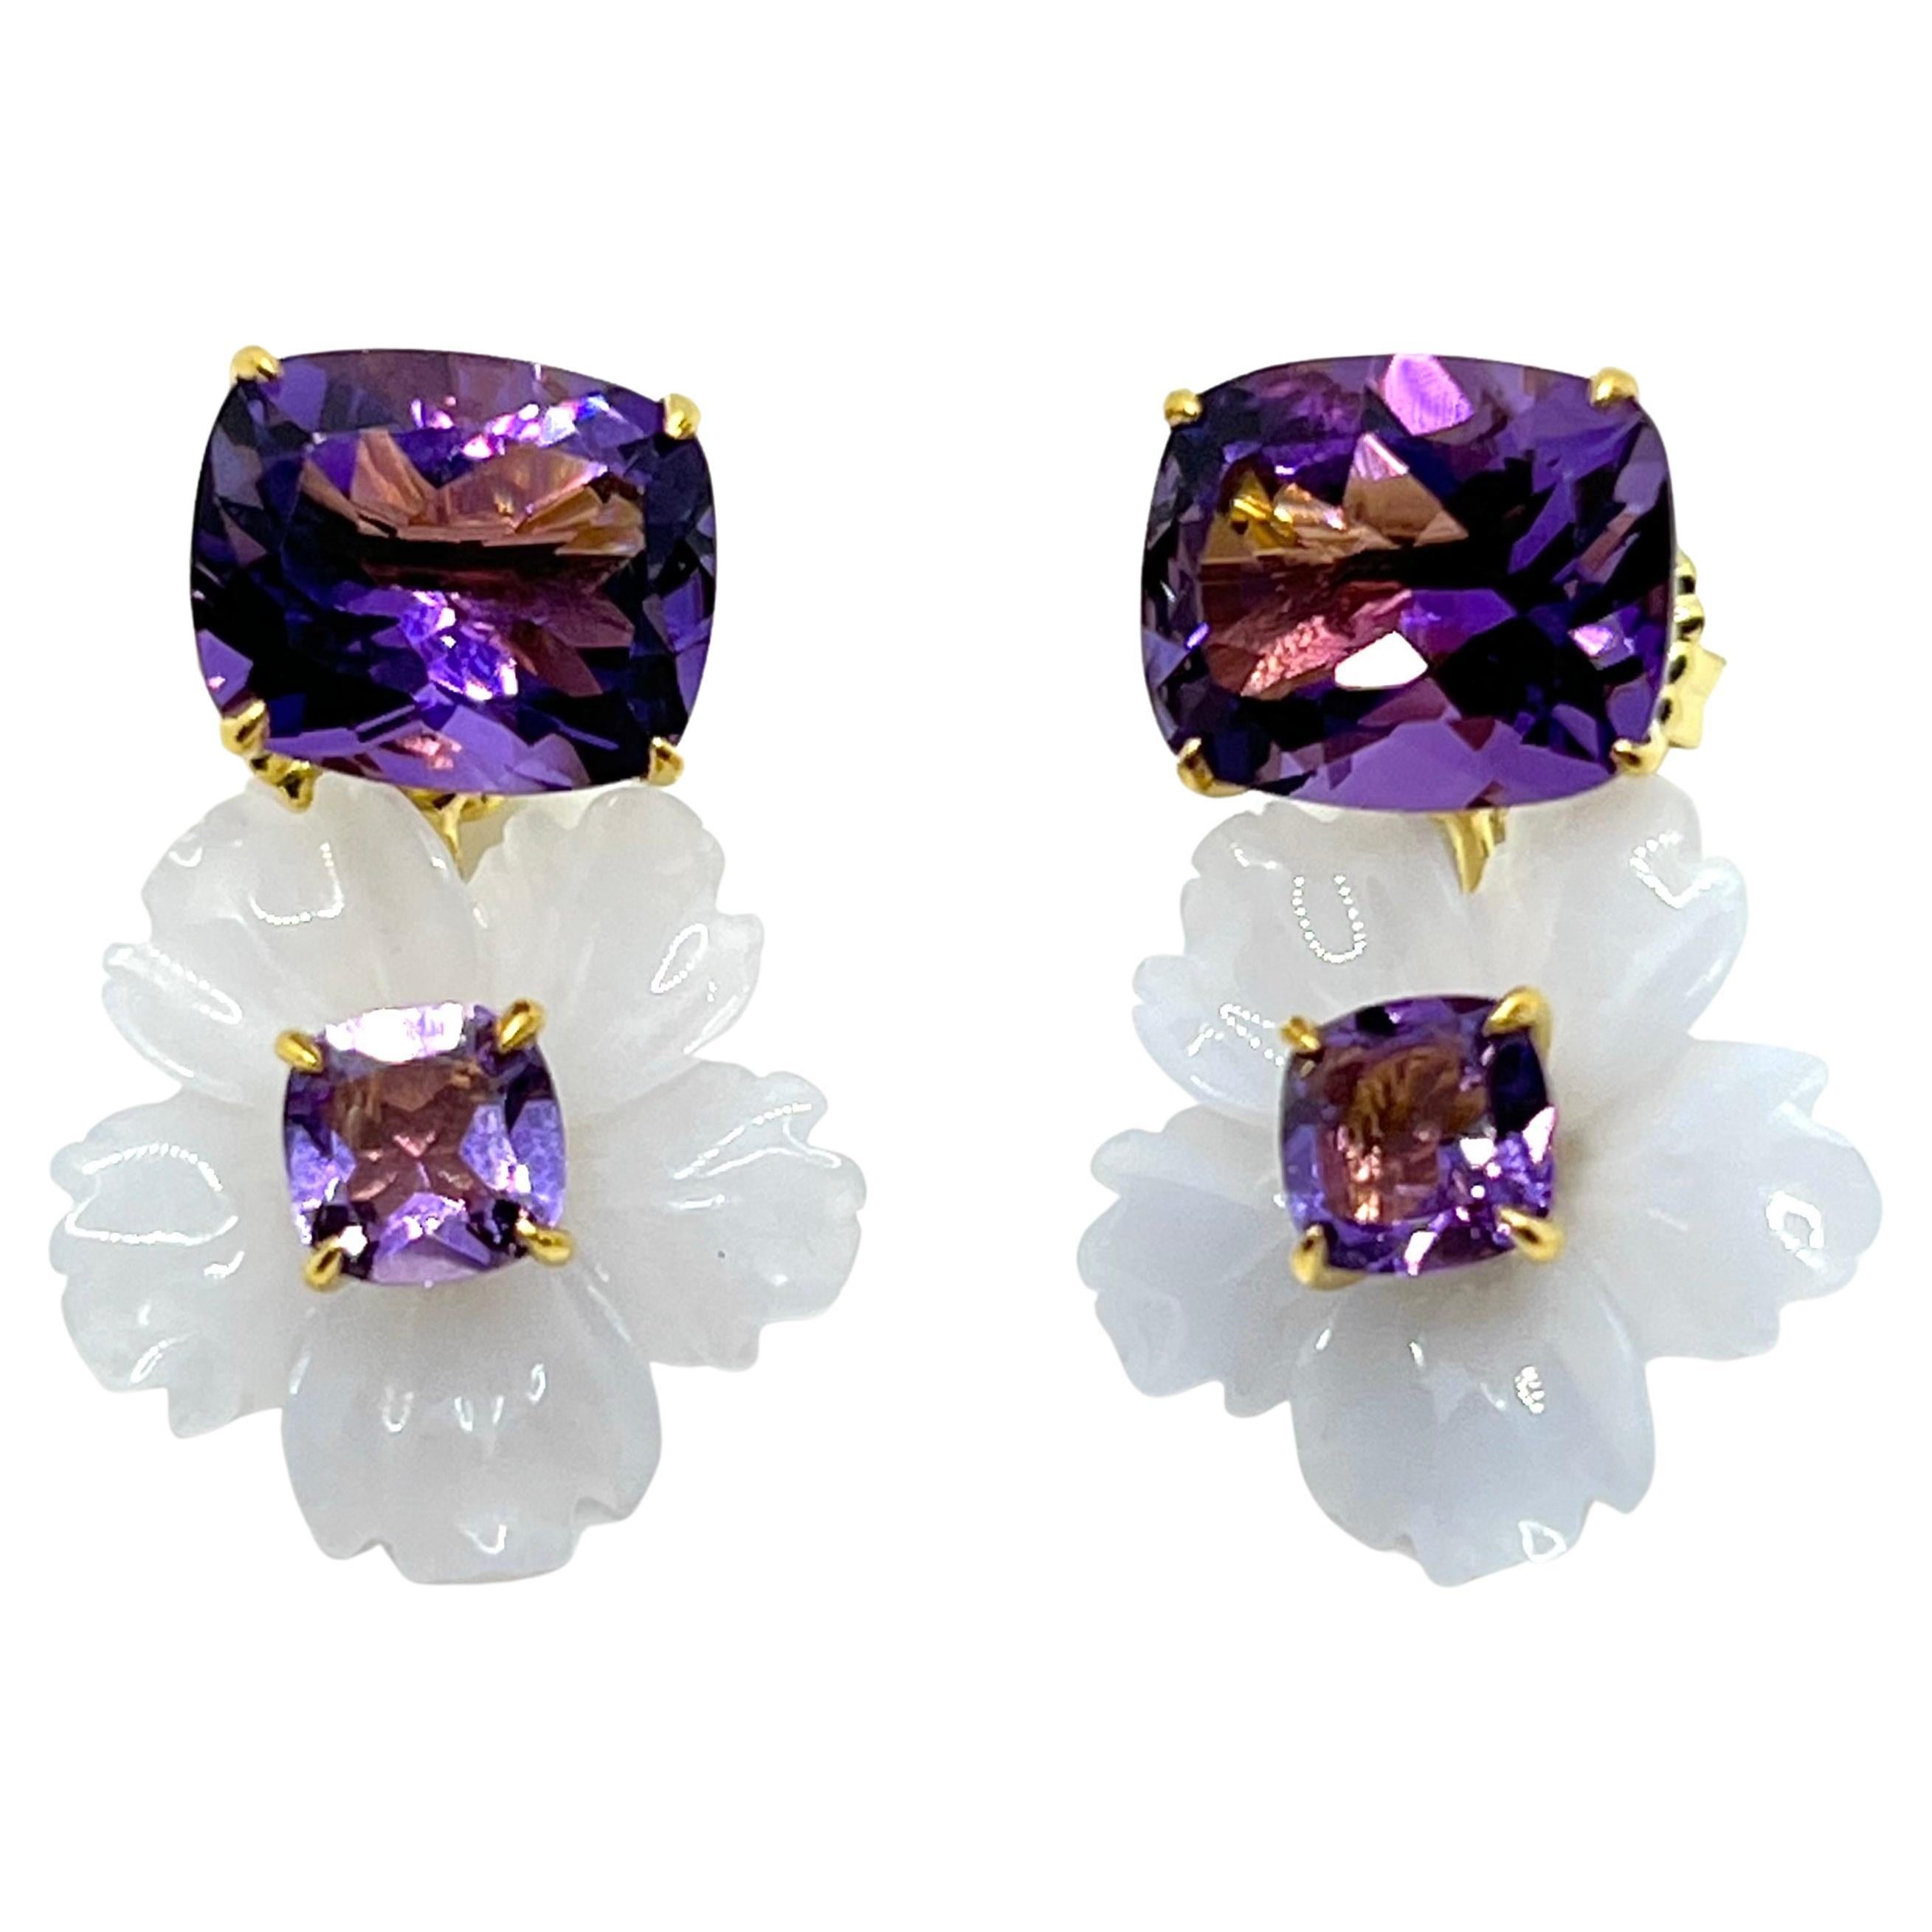 Stunning Cushion-cut Amethyst and Carved Chalcedony Flower Drop Earrings